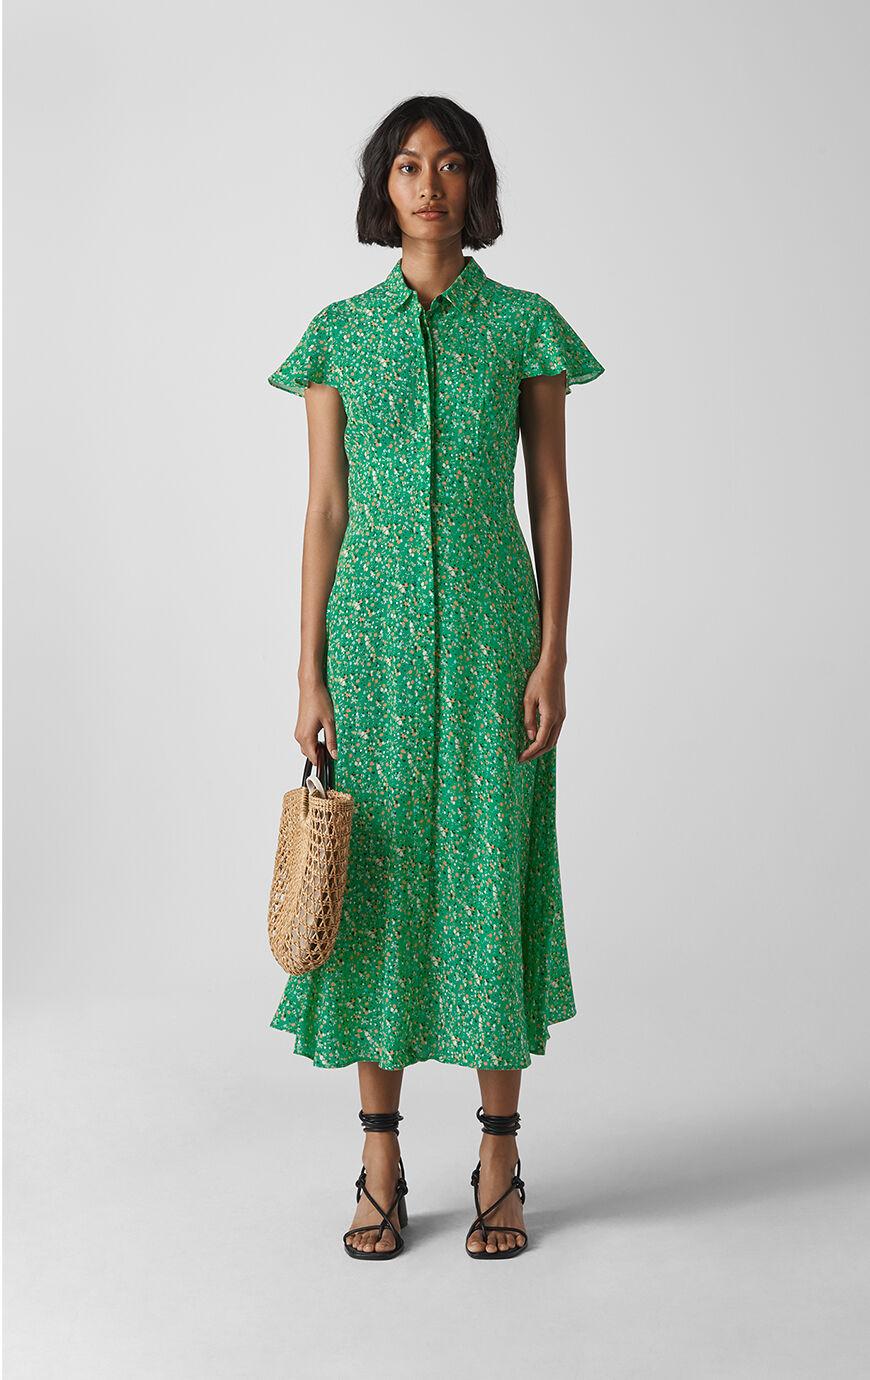 Whistles Green Ditsy Dress Online Store ...